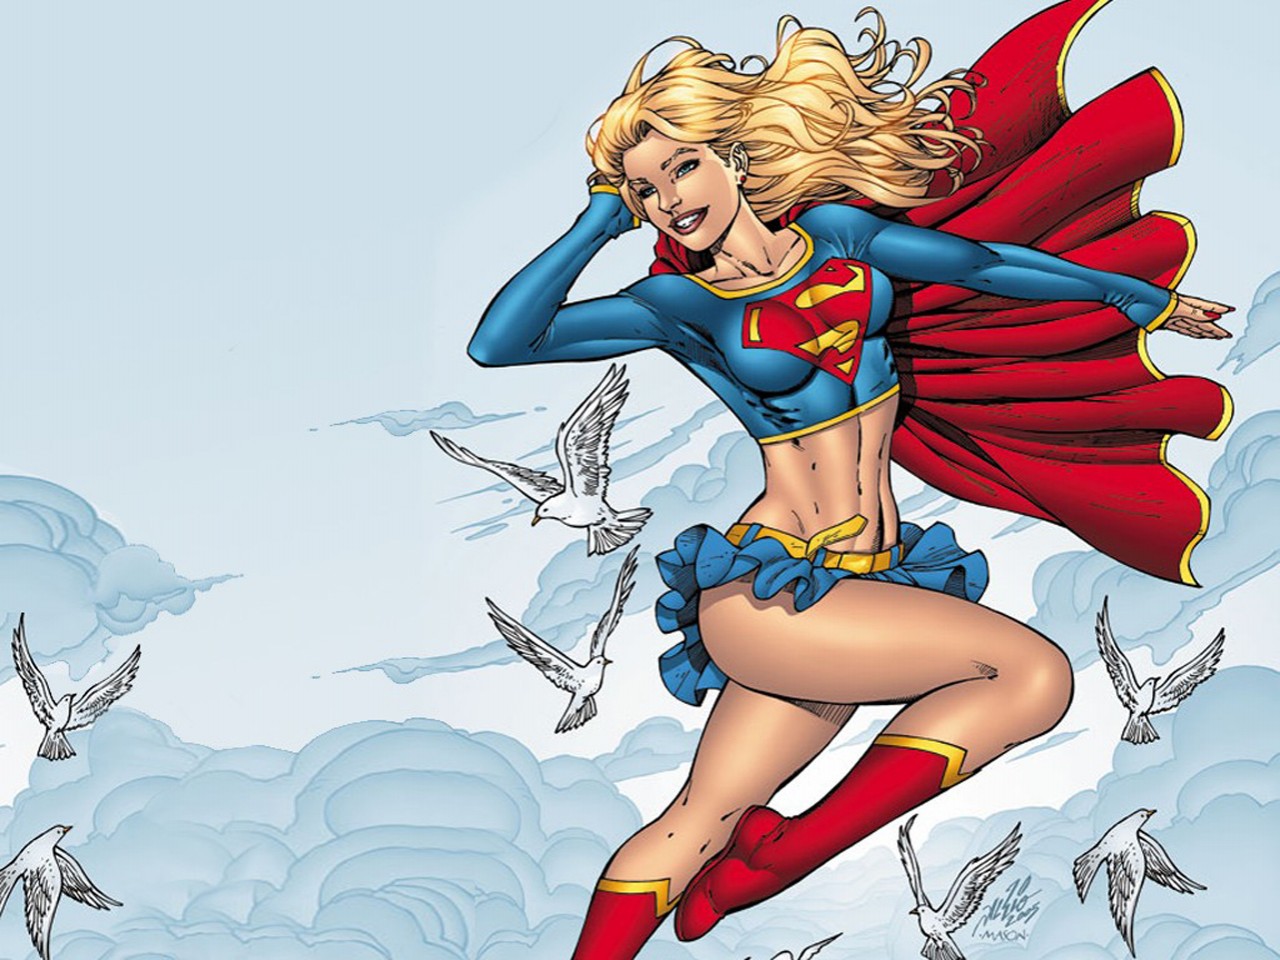 First character details revealed for Supergirl TV series – Eggplante!